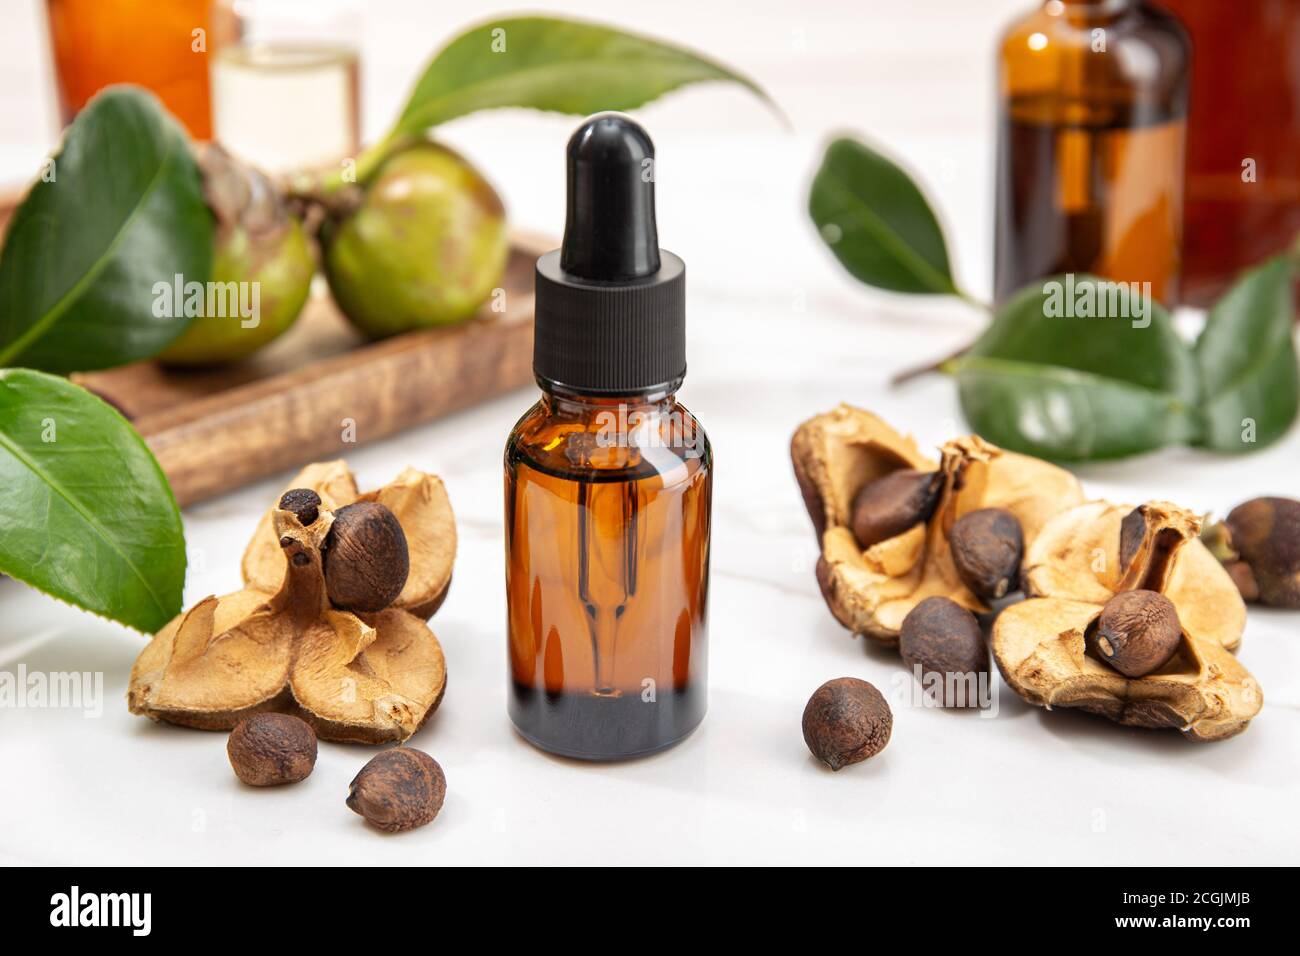 Camellia essential oil bottle and camellia seeds. Beauty, skin care, wellness Stock Photo